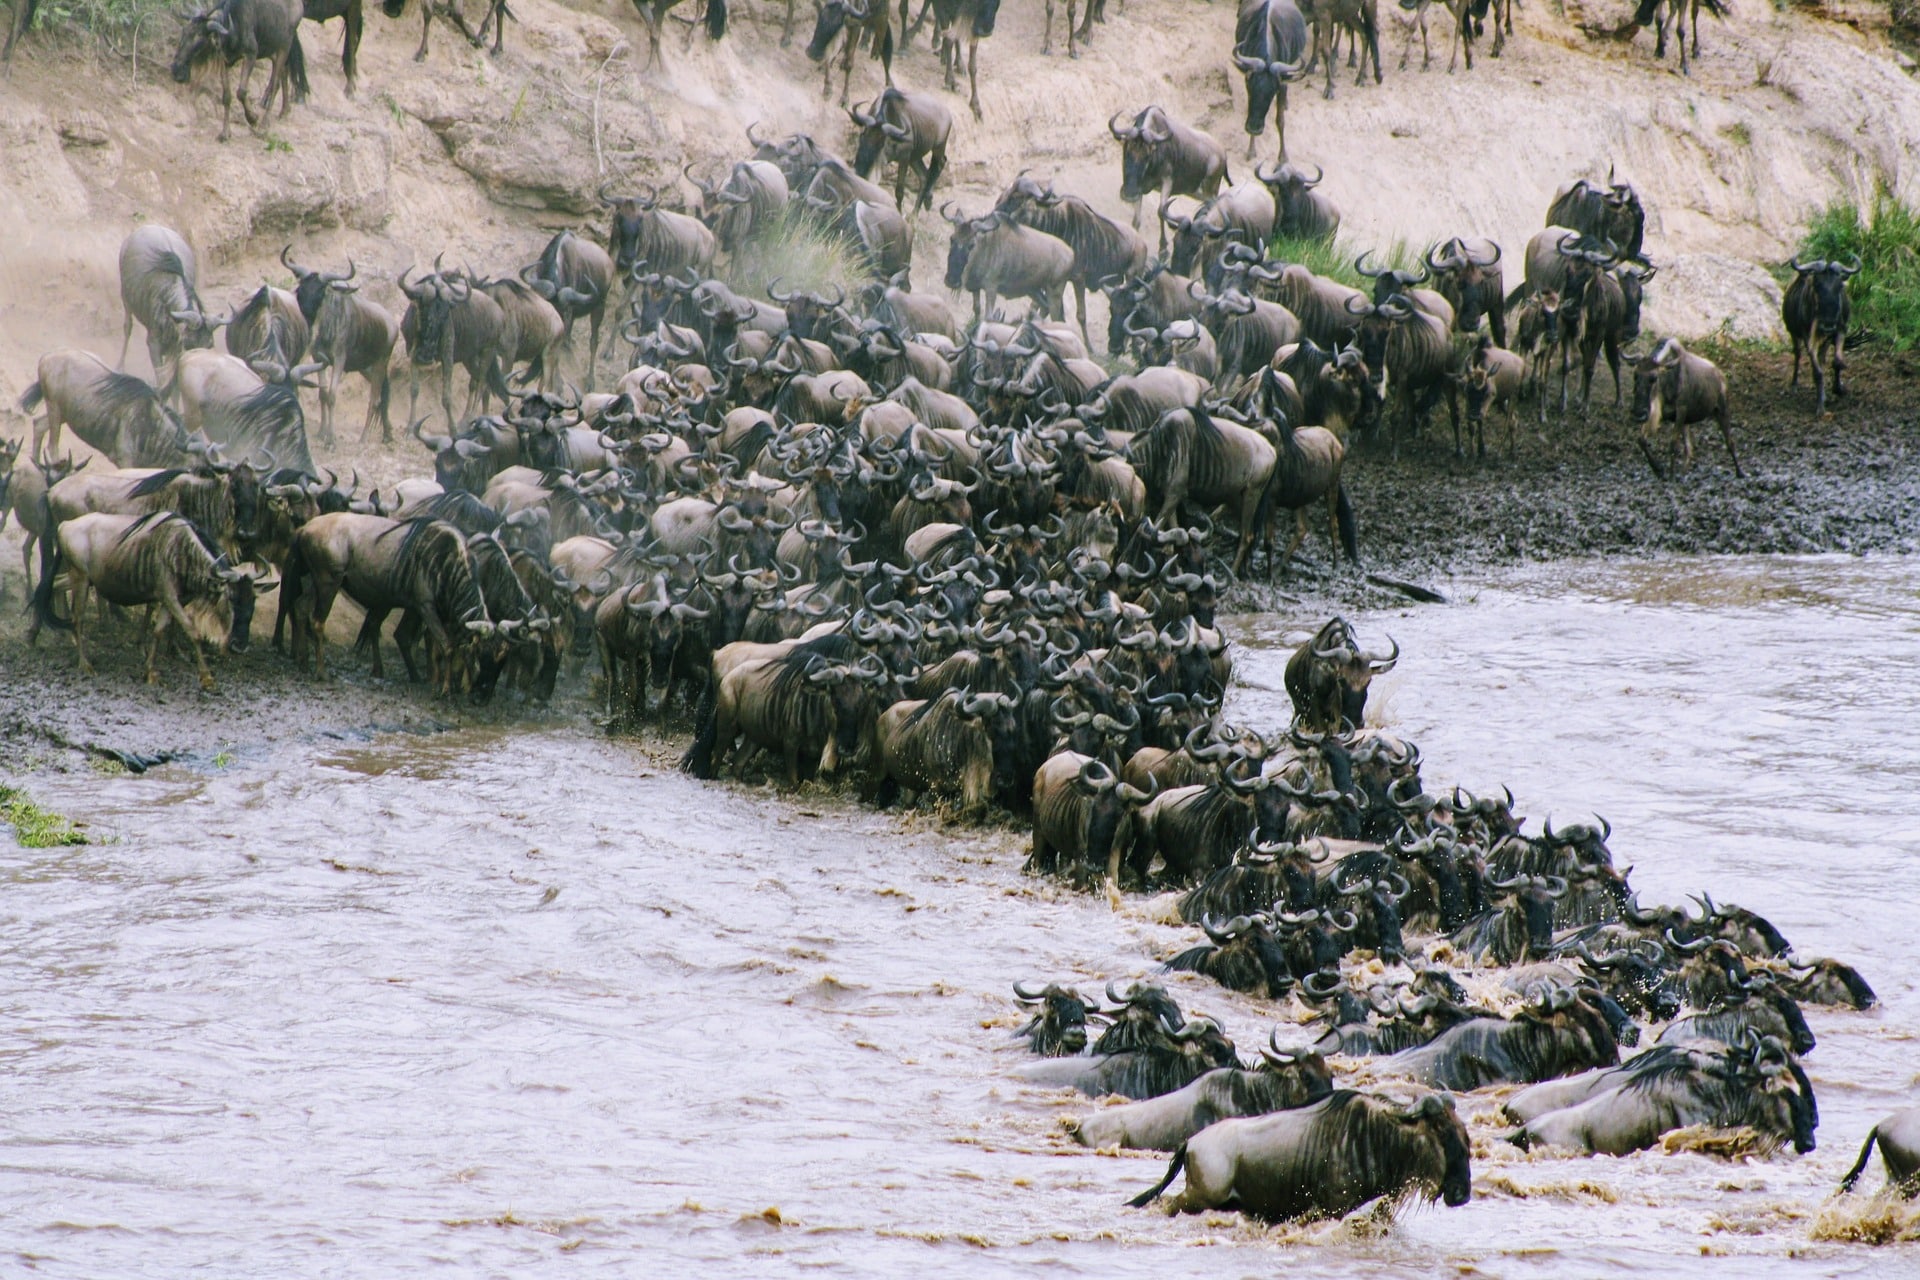 Wildebeest Migration Crossing the River